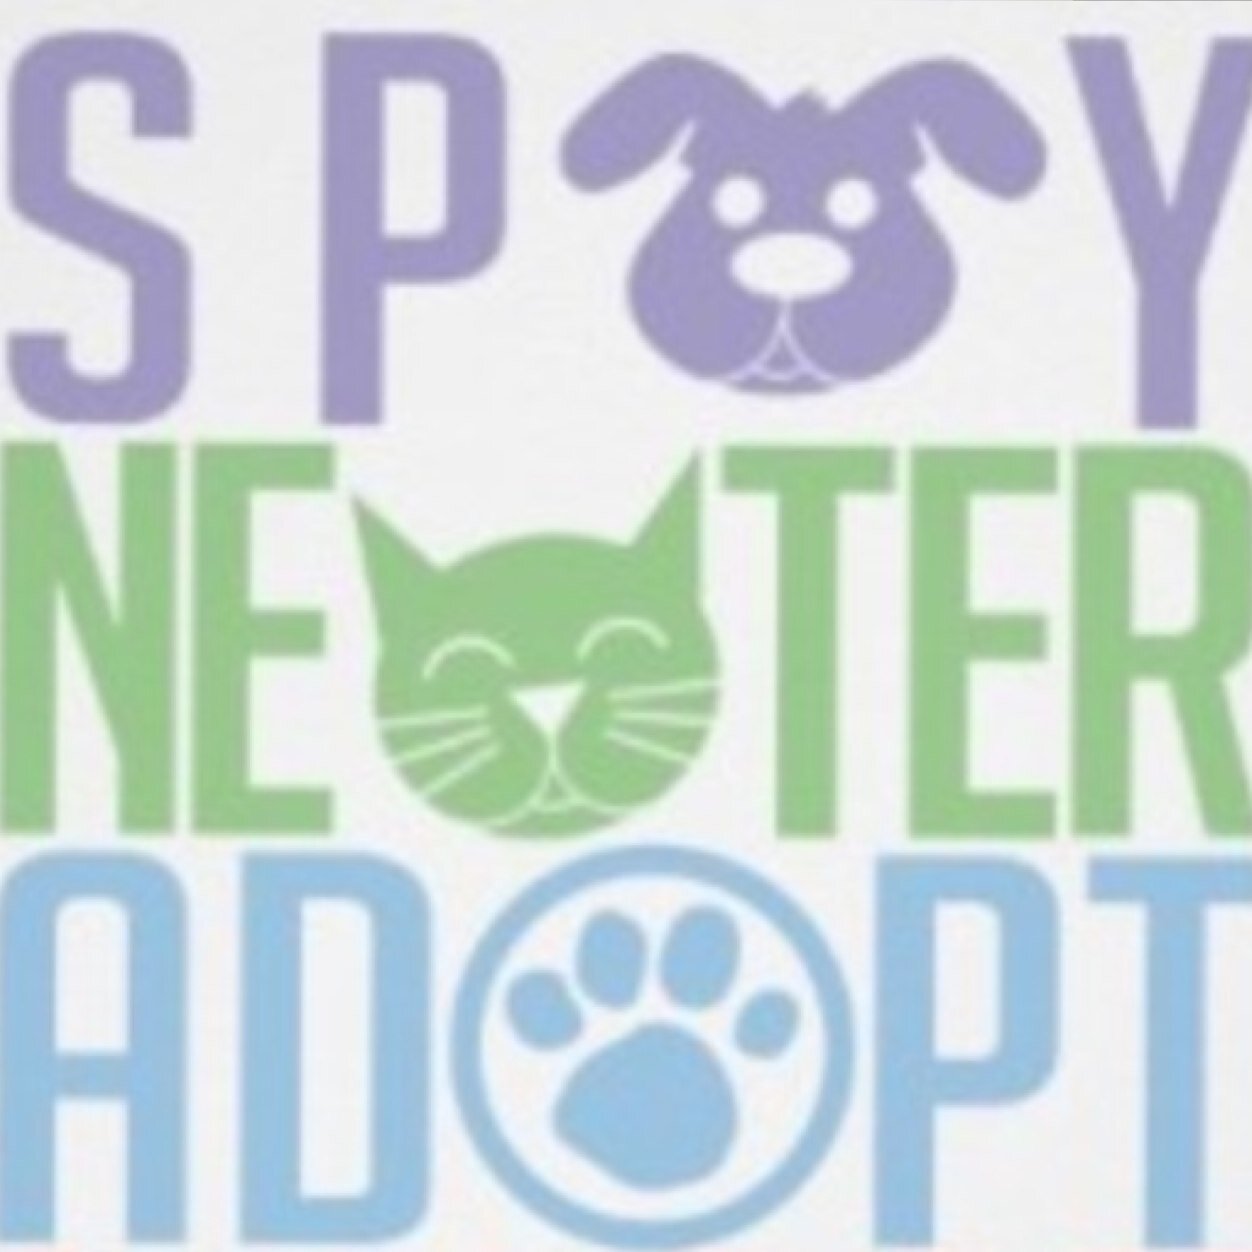 Save lives: spay, neuter, and adopt!